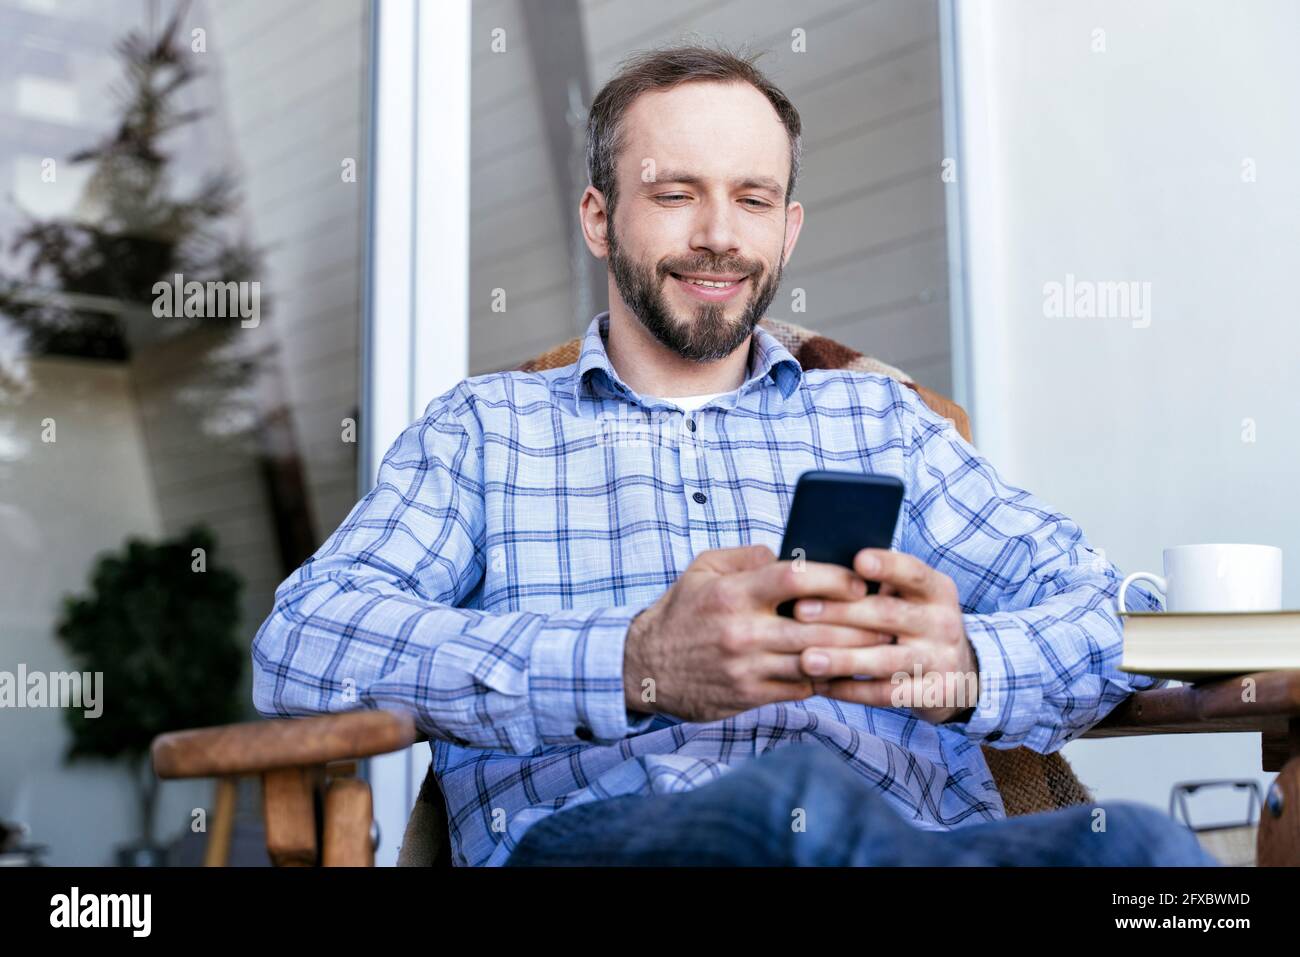 Man in casual clothing using smart phone on balcony Stock Photo